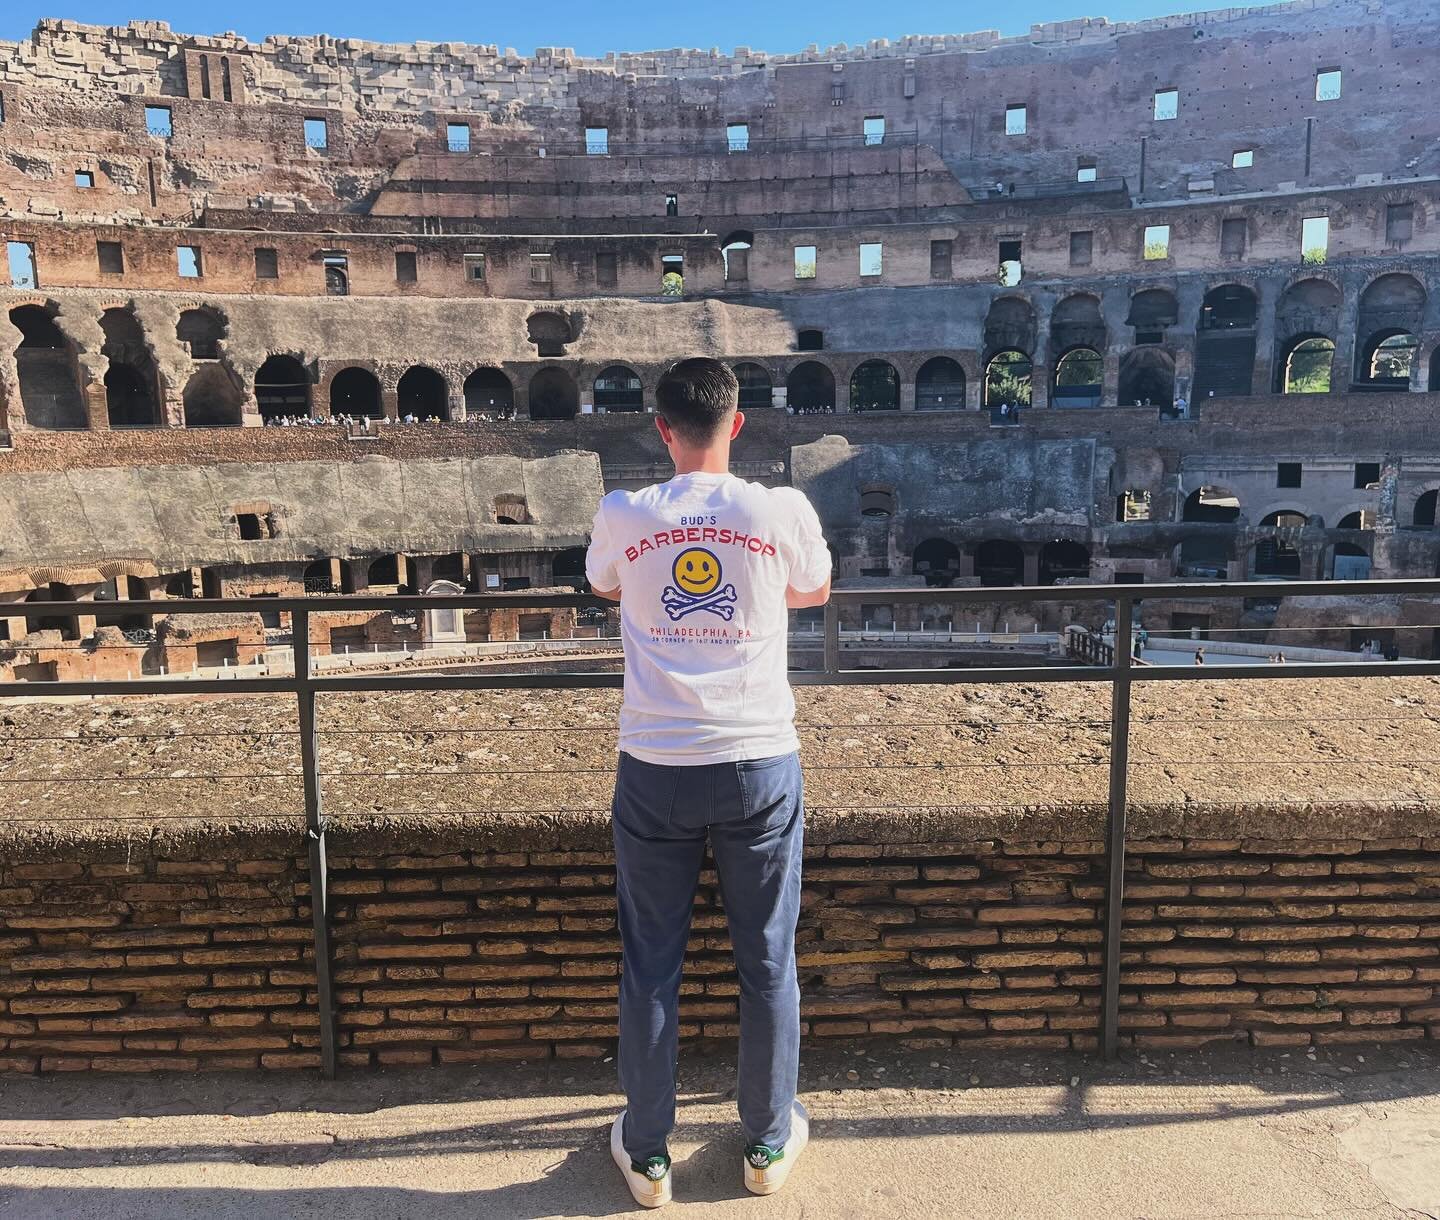 Thanks to our friend @vincetagram__ for bringing a piece of the shop all the way to the Colosseum in Rome!!! SOOO SICK!

IF YOU CAN&rsquo;T BEAT &lsquo;EM - TRY ANYWAY.⚔️😎💈

#PhillyBarber #PhillyBarbers #PhillyBarberShop #PhillyBarbershops #SouthPh